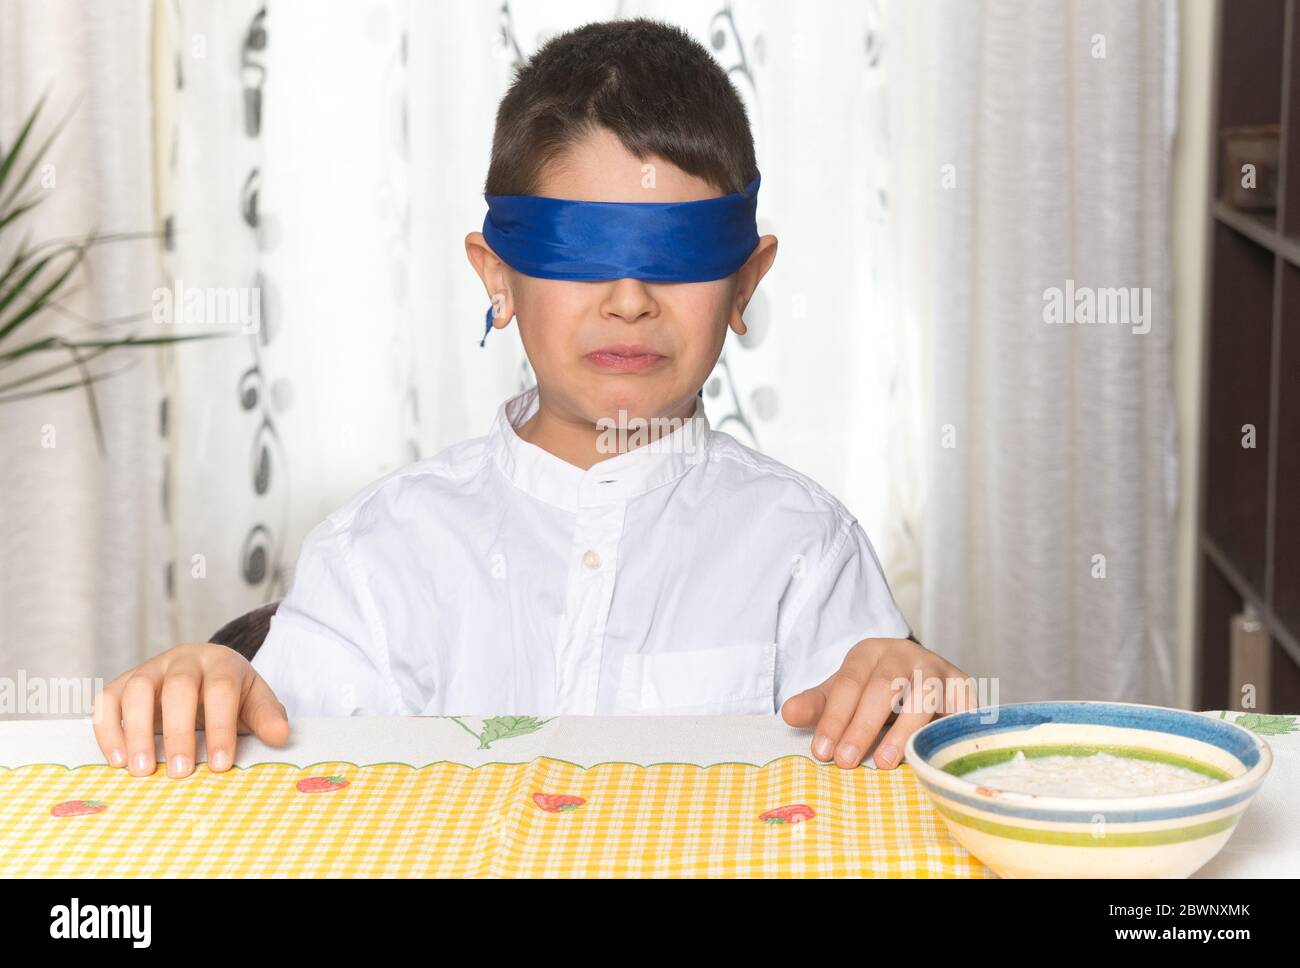 Disgust gesture on the face of an 8-year-old boy after having done a food taste test. Stock Photo